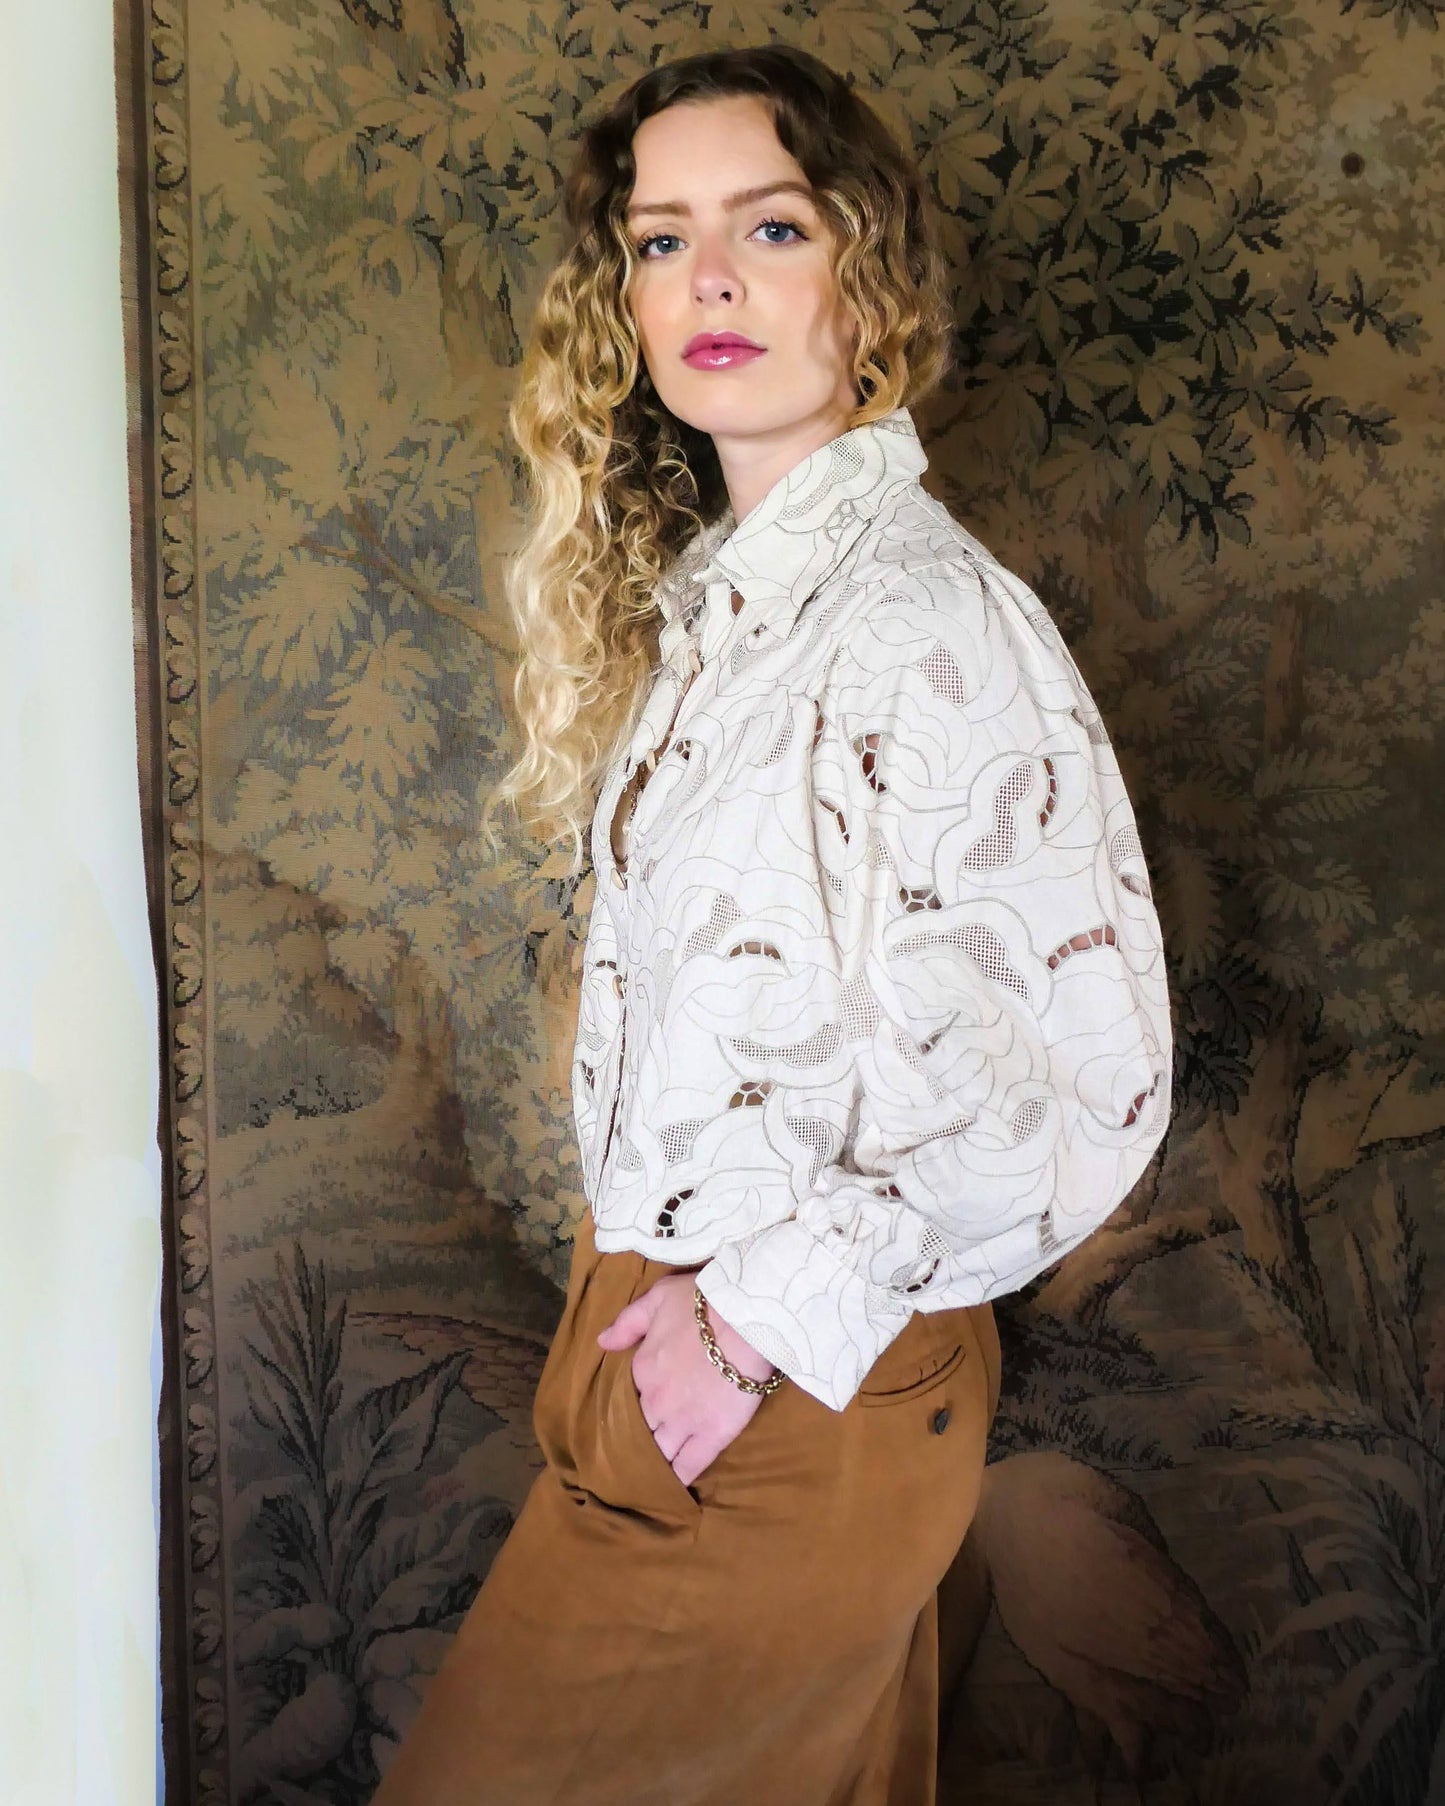 An almost crop top with a relaxed fit and warm neutral tones of cream and taupe, made with our signature Lim's Vintage embroidered cotton fabric. Comes with romantic puffed long sleeves and a scalloped hem. Wear it buttoned or unbuttoned, with wide leg fall colored slacks or jeans and leather boots.